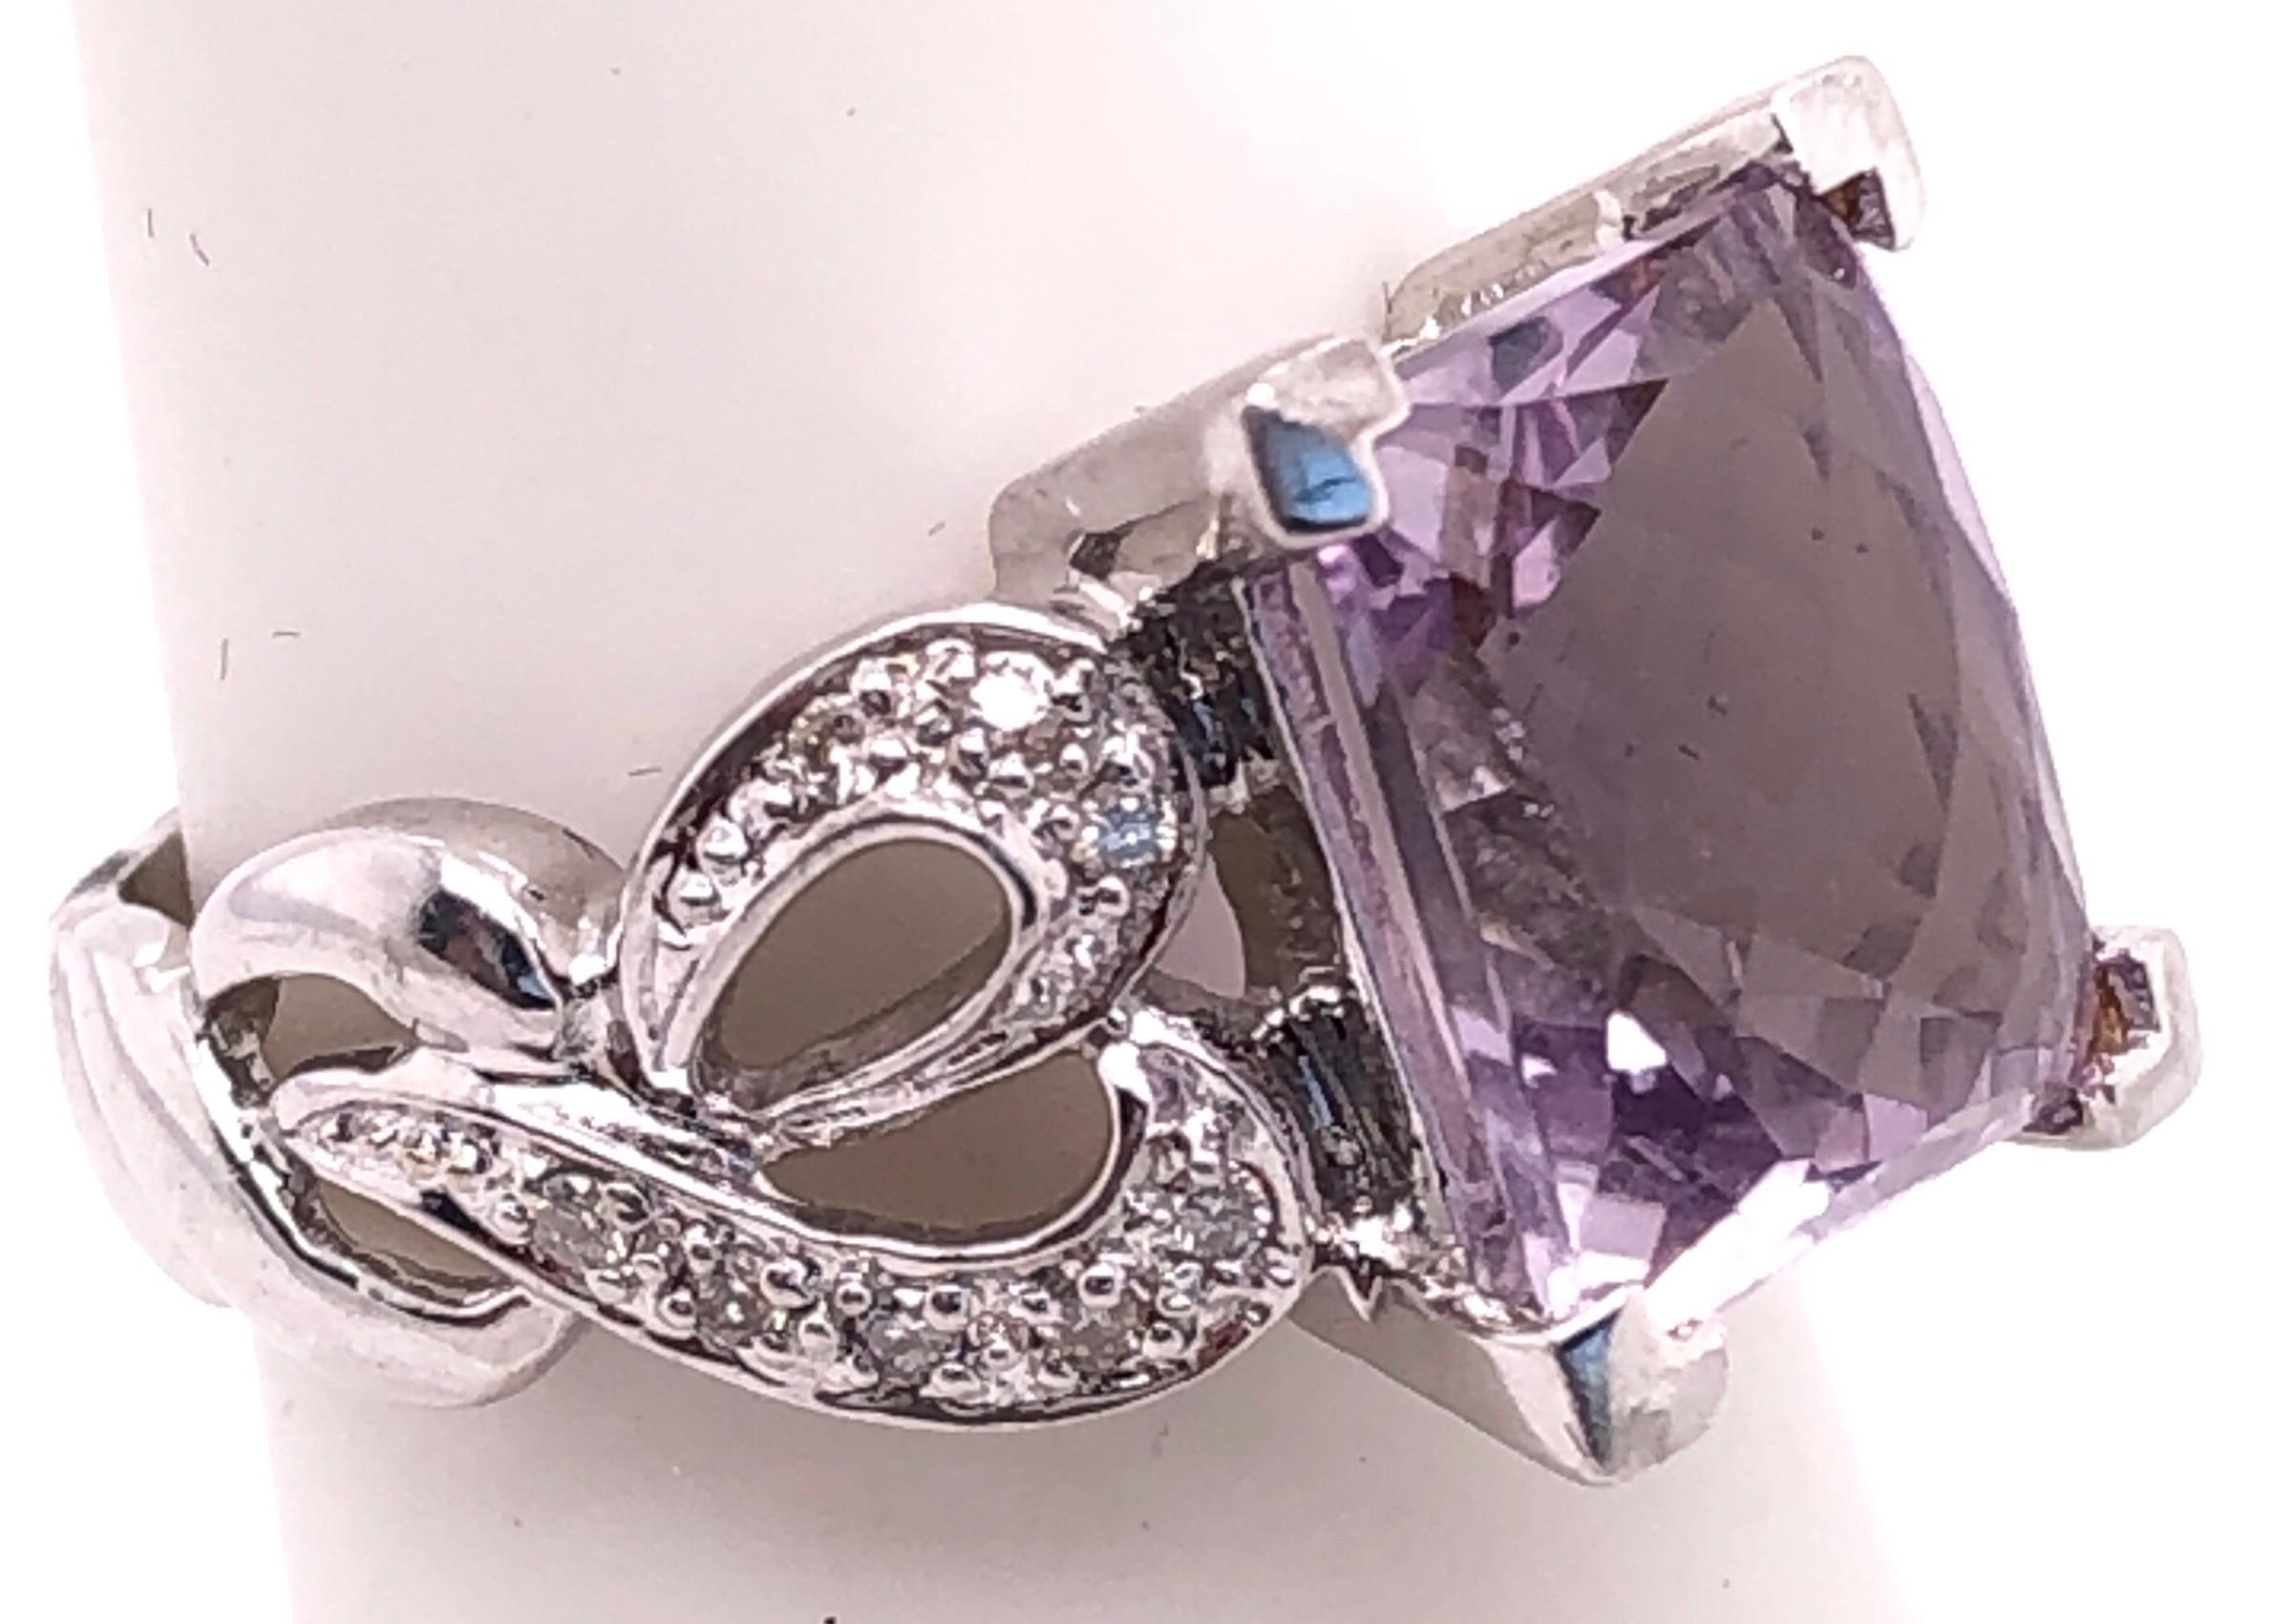 14 Karat White Gold Amethyst Solitaire Ring with Diamond Accents Size 5.
1.00 total diamond weight.
4.65 grams total weight.